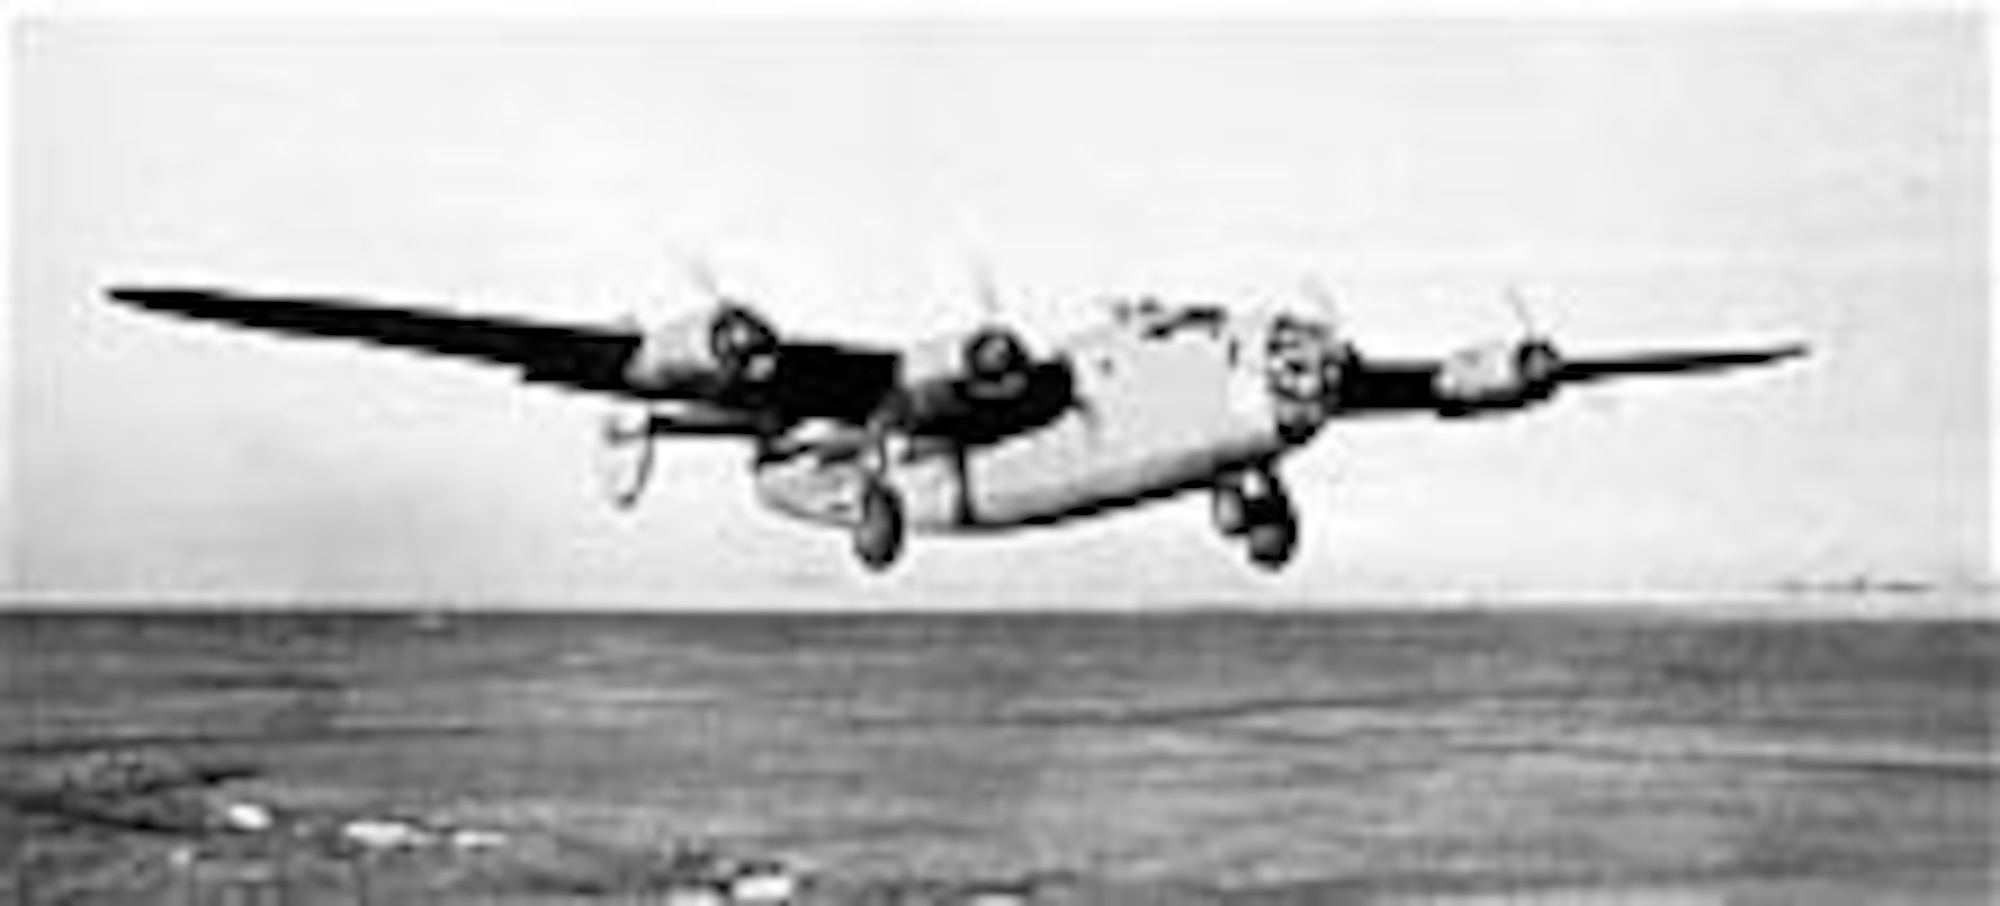 B-24 of the 376th Bomb Group, 515th Bomb Squadron, taking off. (U.S. Air Force photo)